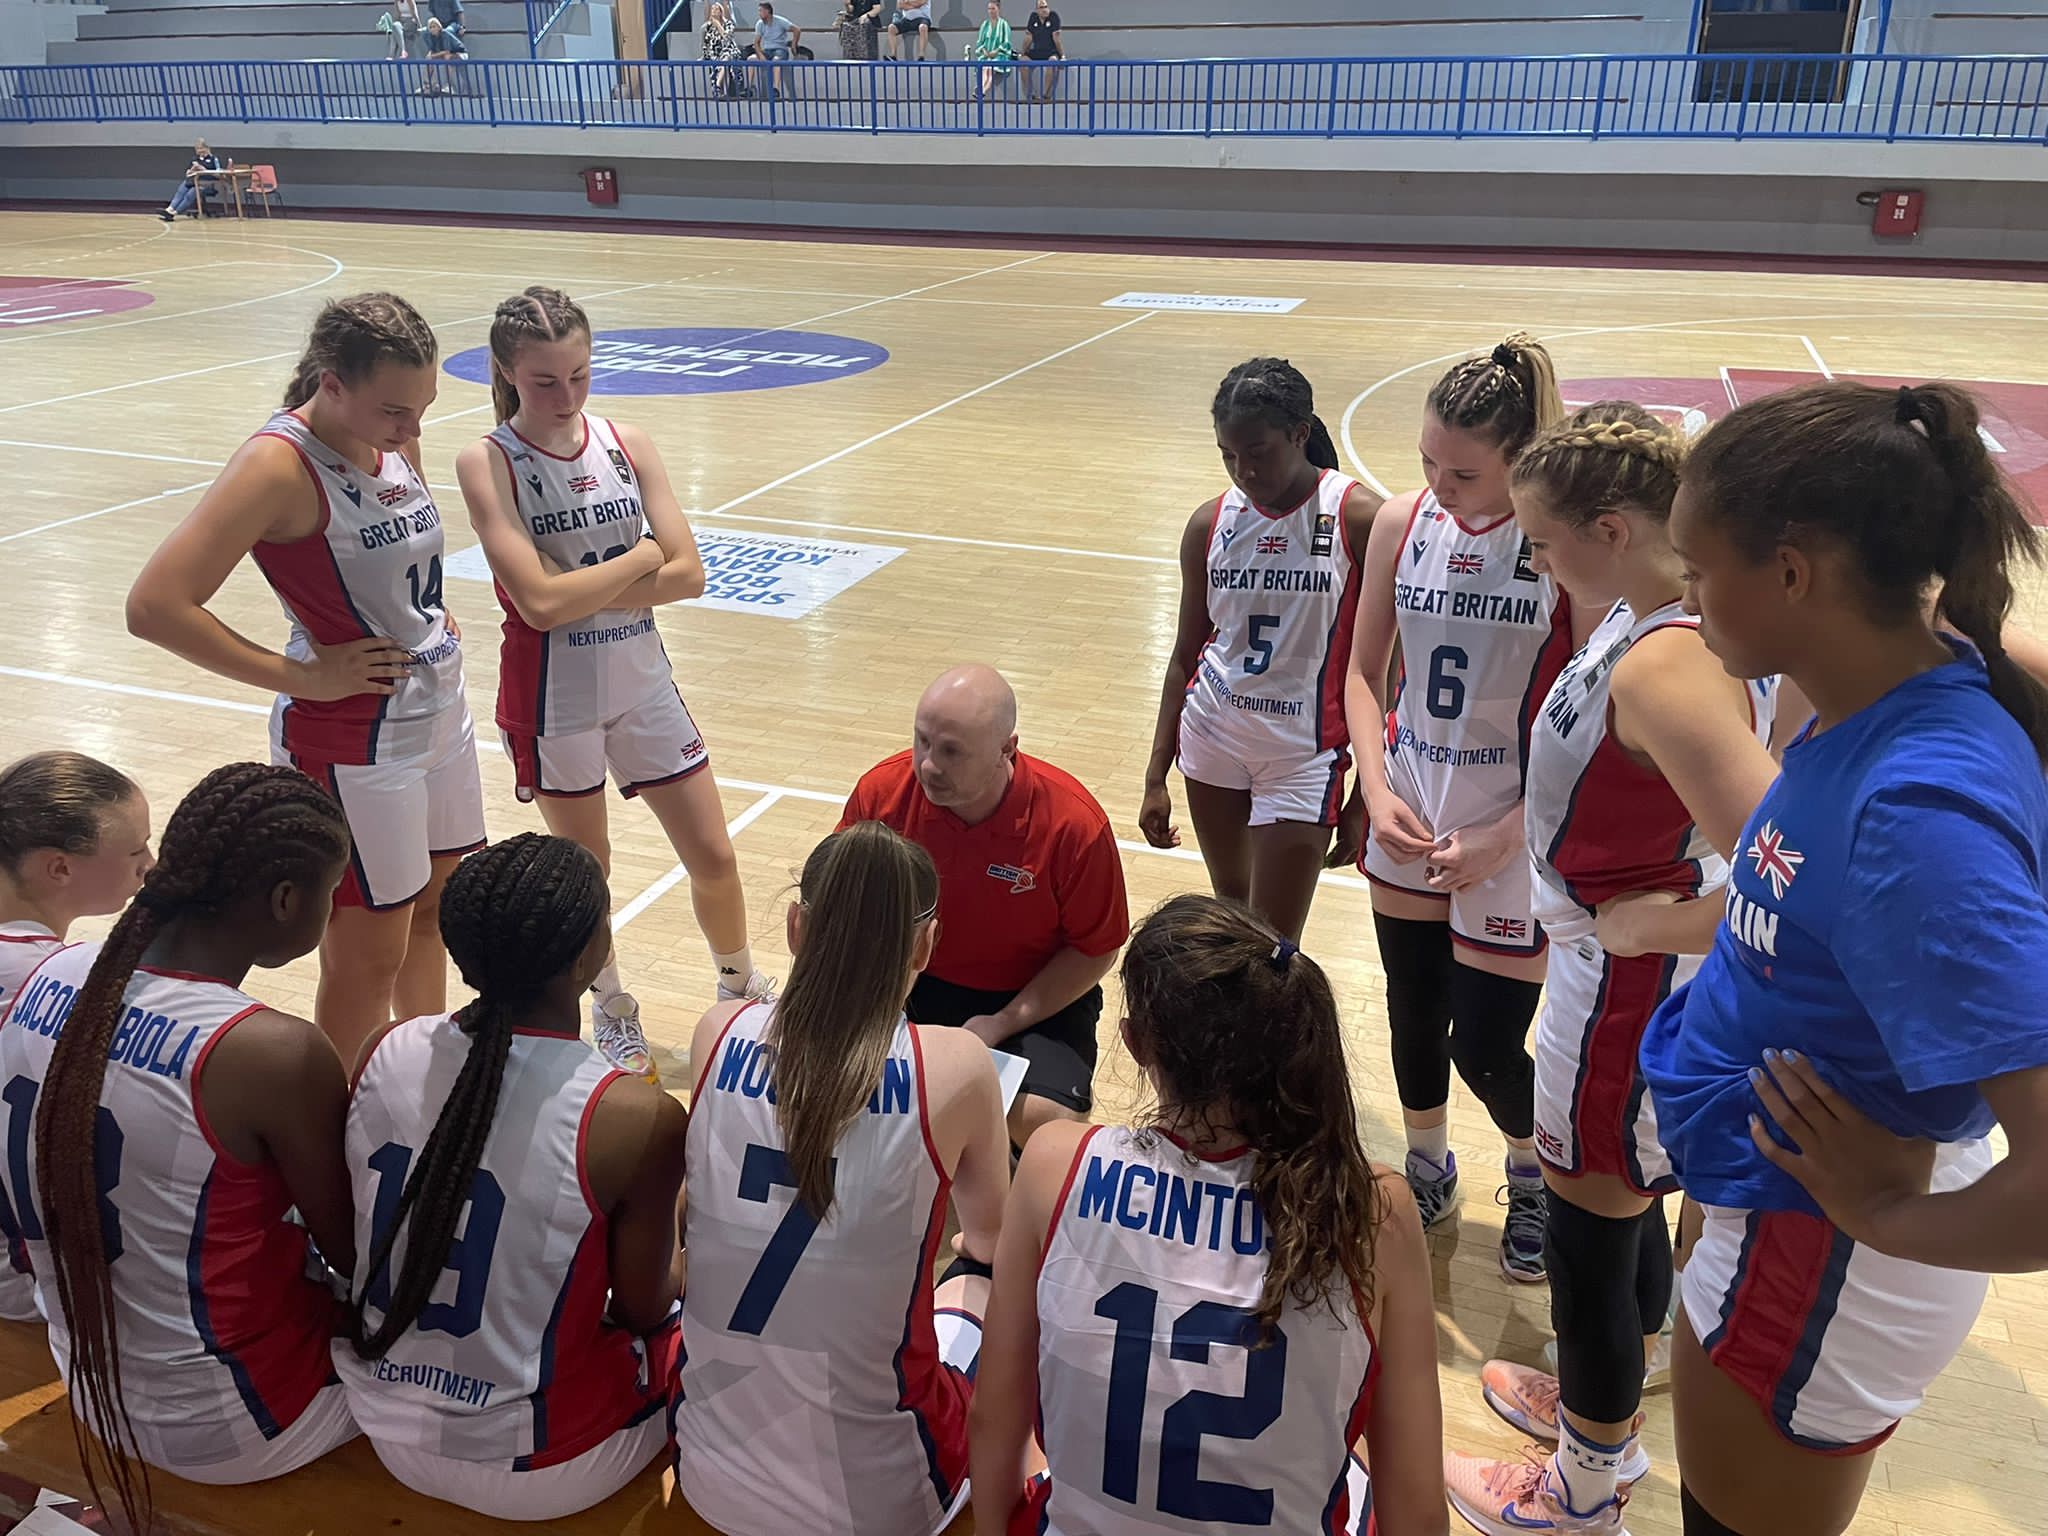 Donnie MacDonald is knelt by a basketball court. He is wearing a red polo shirt. He is surrounded by the GB under 16 women's basketball team. They are wearing mainly white kit. 